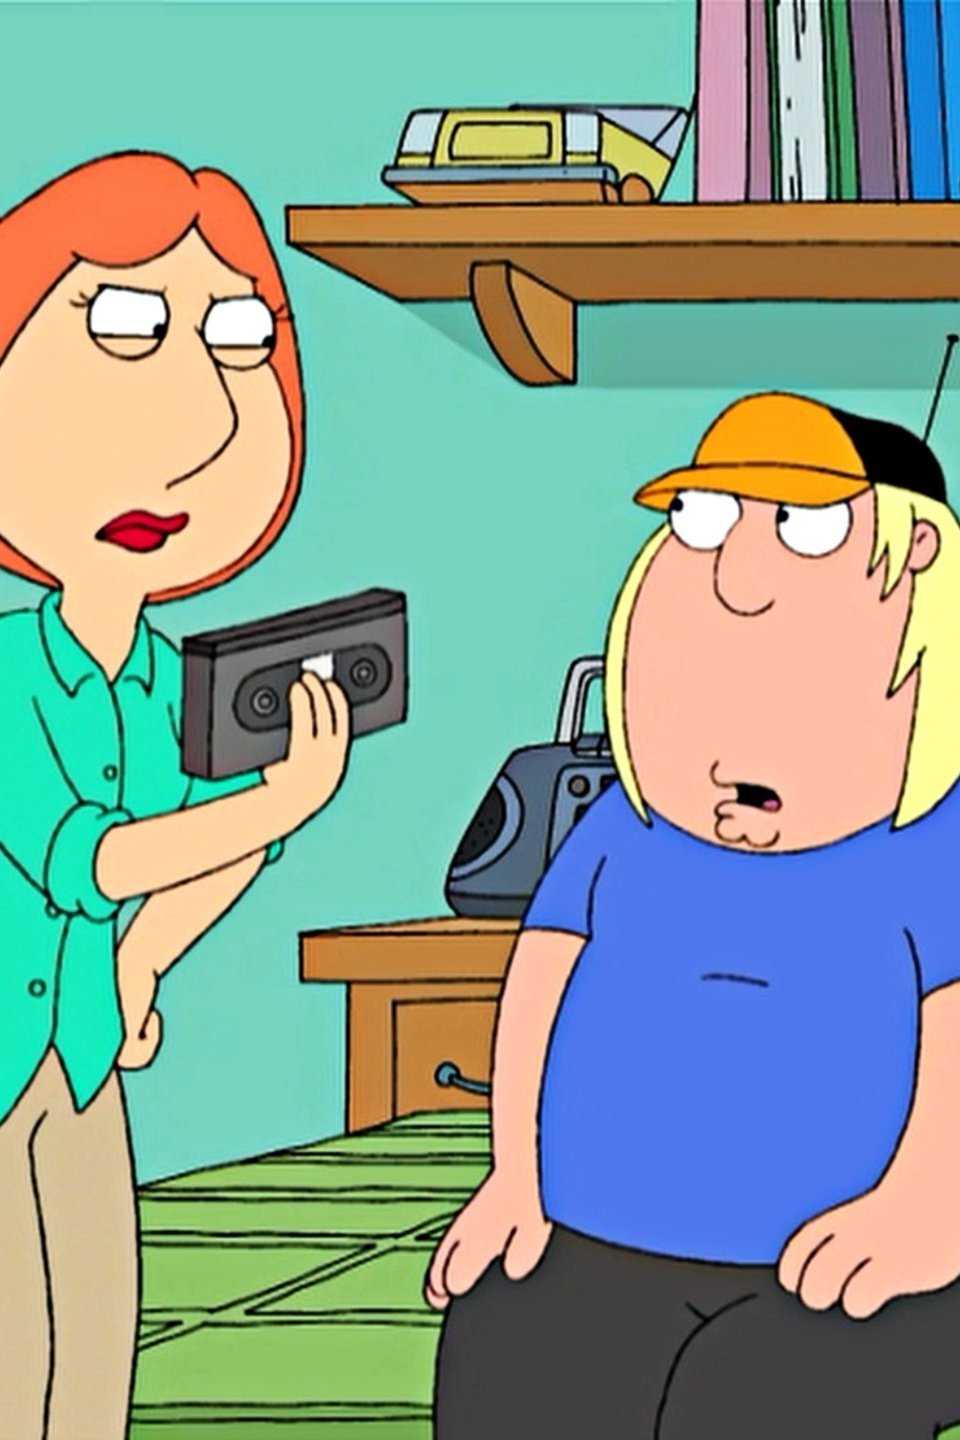 Family Guy Prick Up Your Ears Prick Up Your Ears Pictures - Rotten Tomatoes